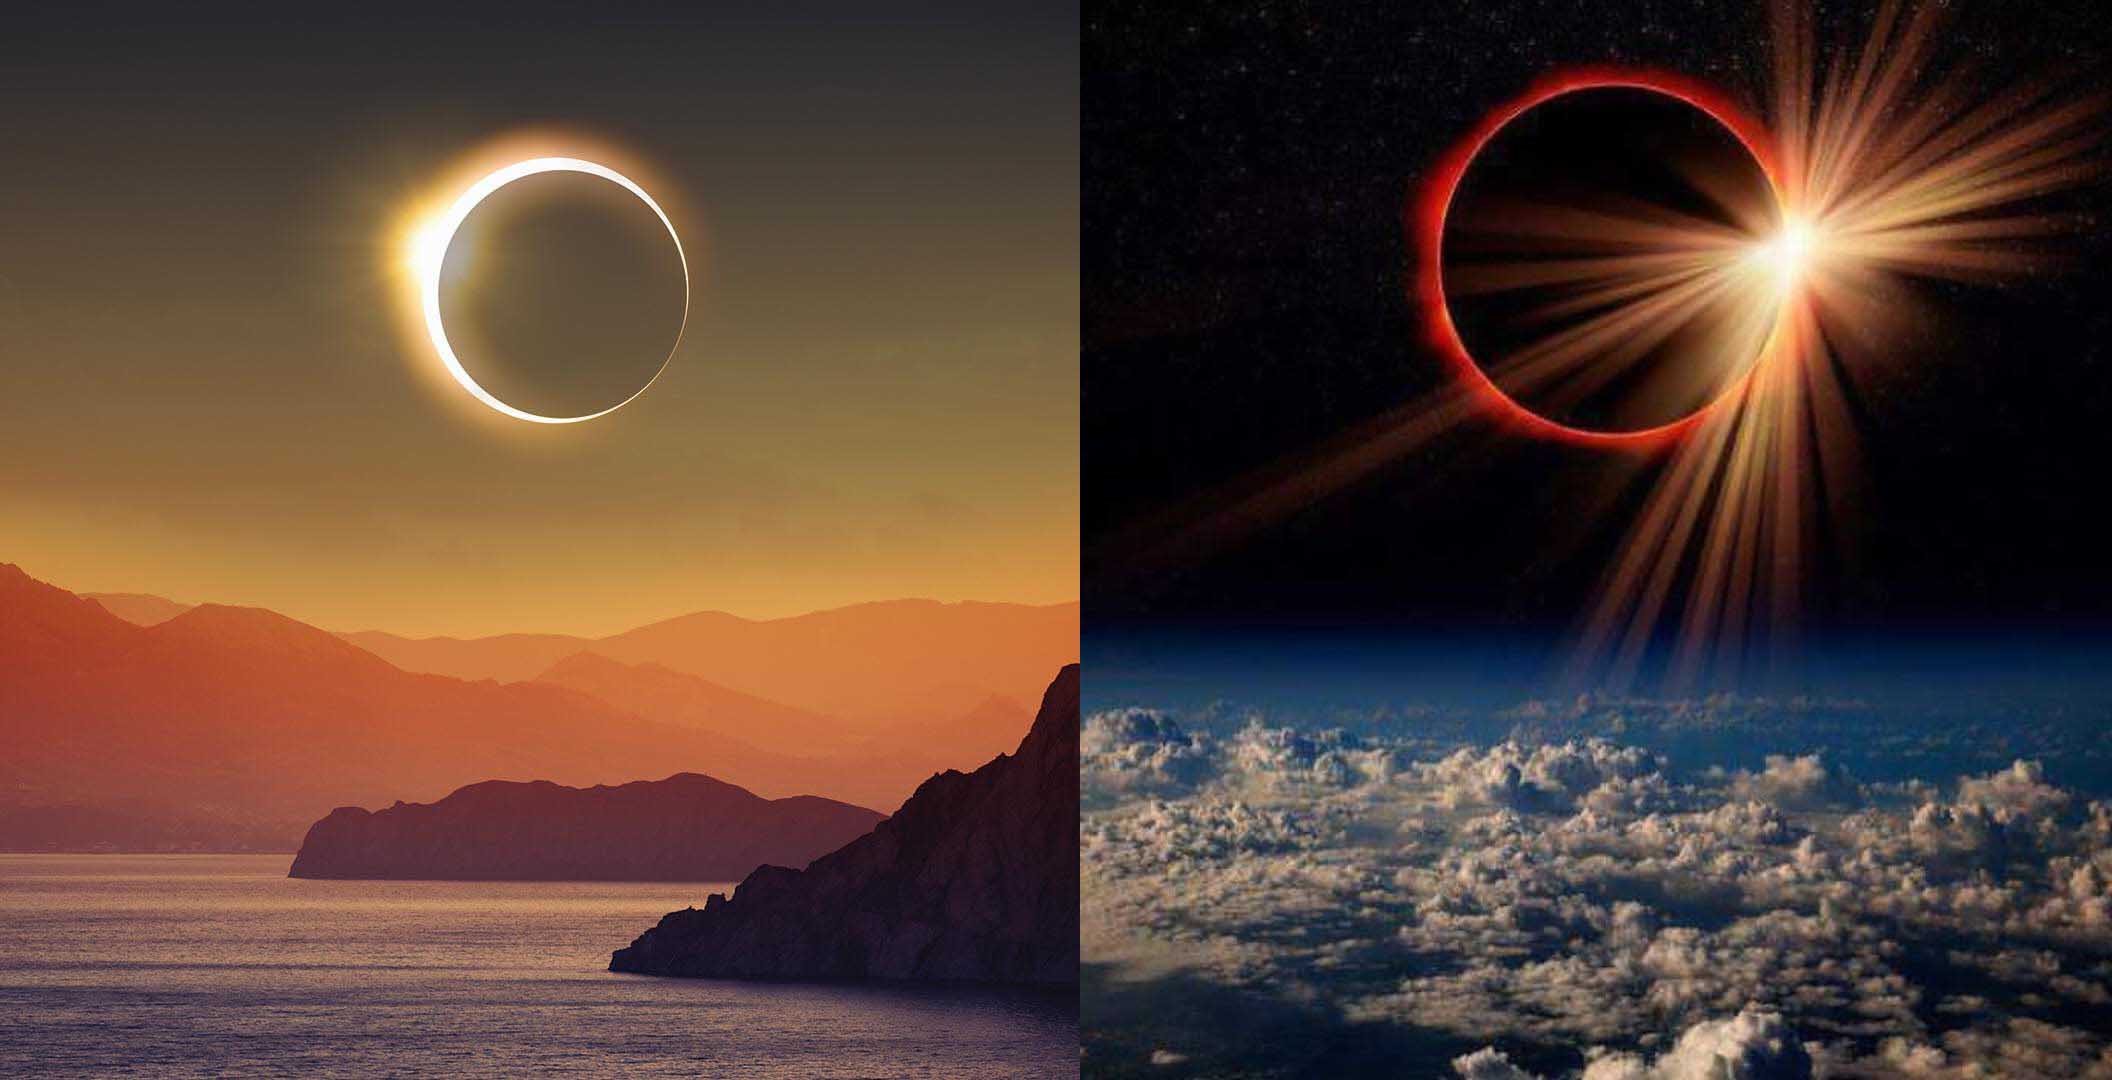 Total Solar Eclipse April 8 2024 – What to expect, Safety issue, Donald Trump point of view, Social media madness, Big Conspiracy theories